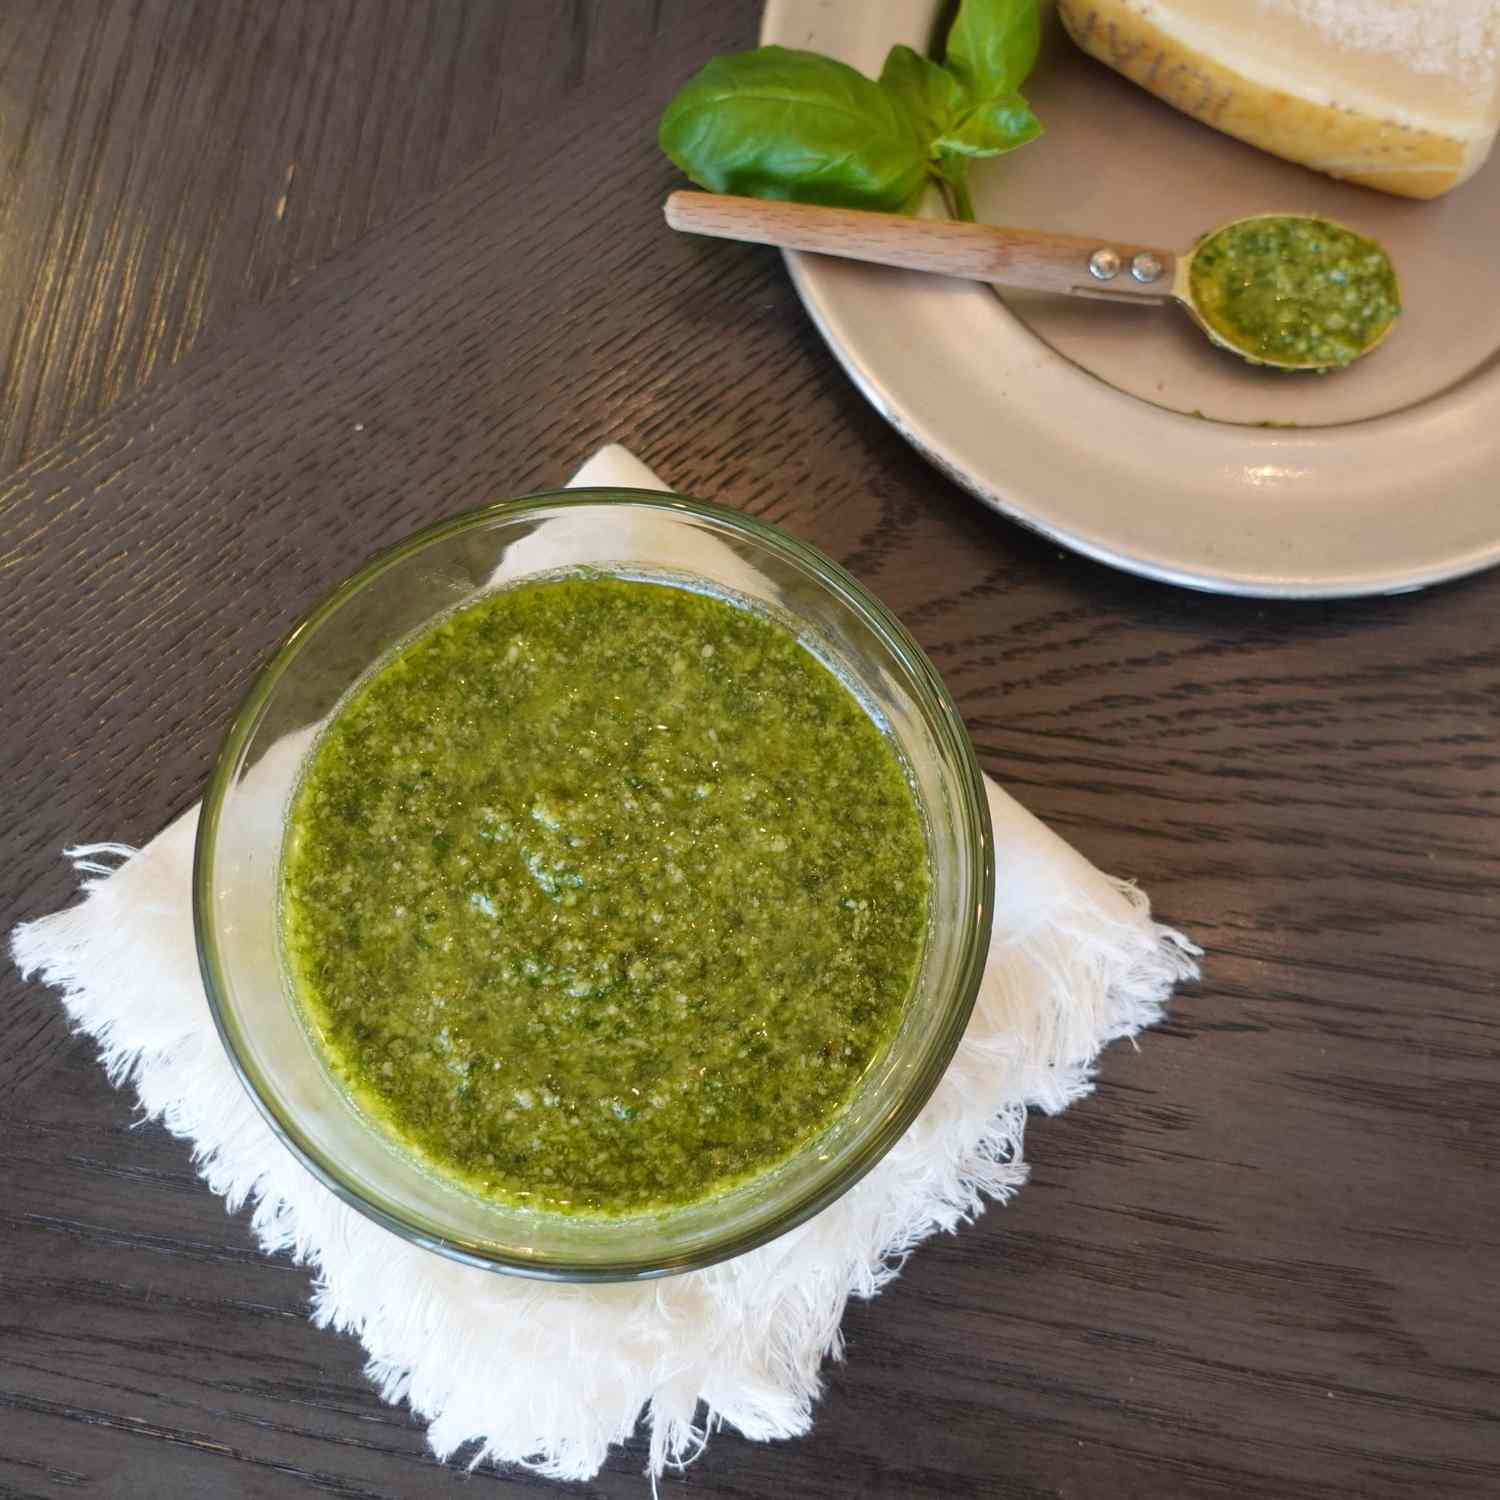 Homemade basil pesto in a clear glass bowl